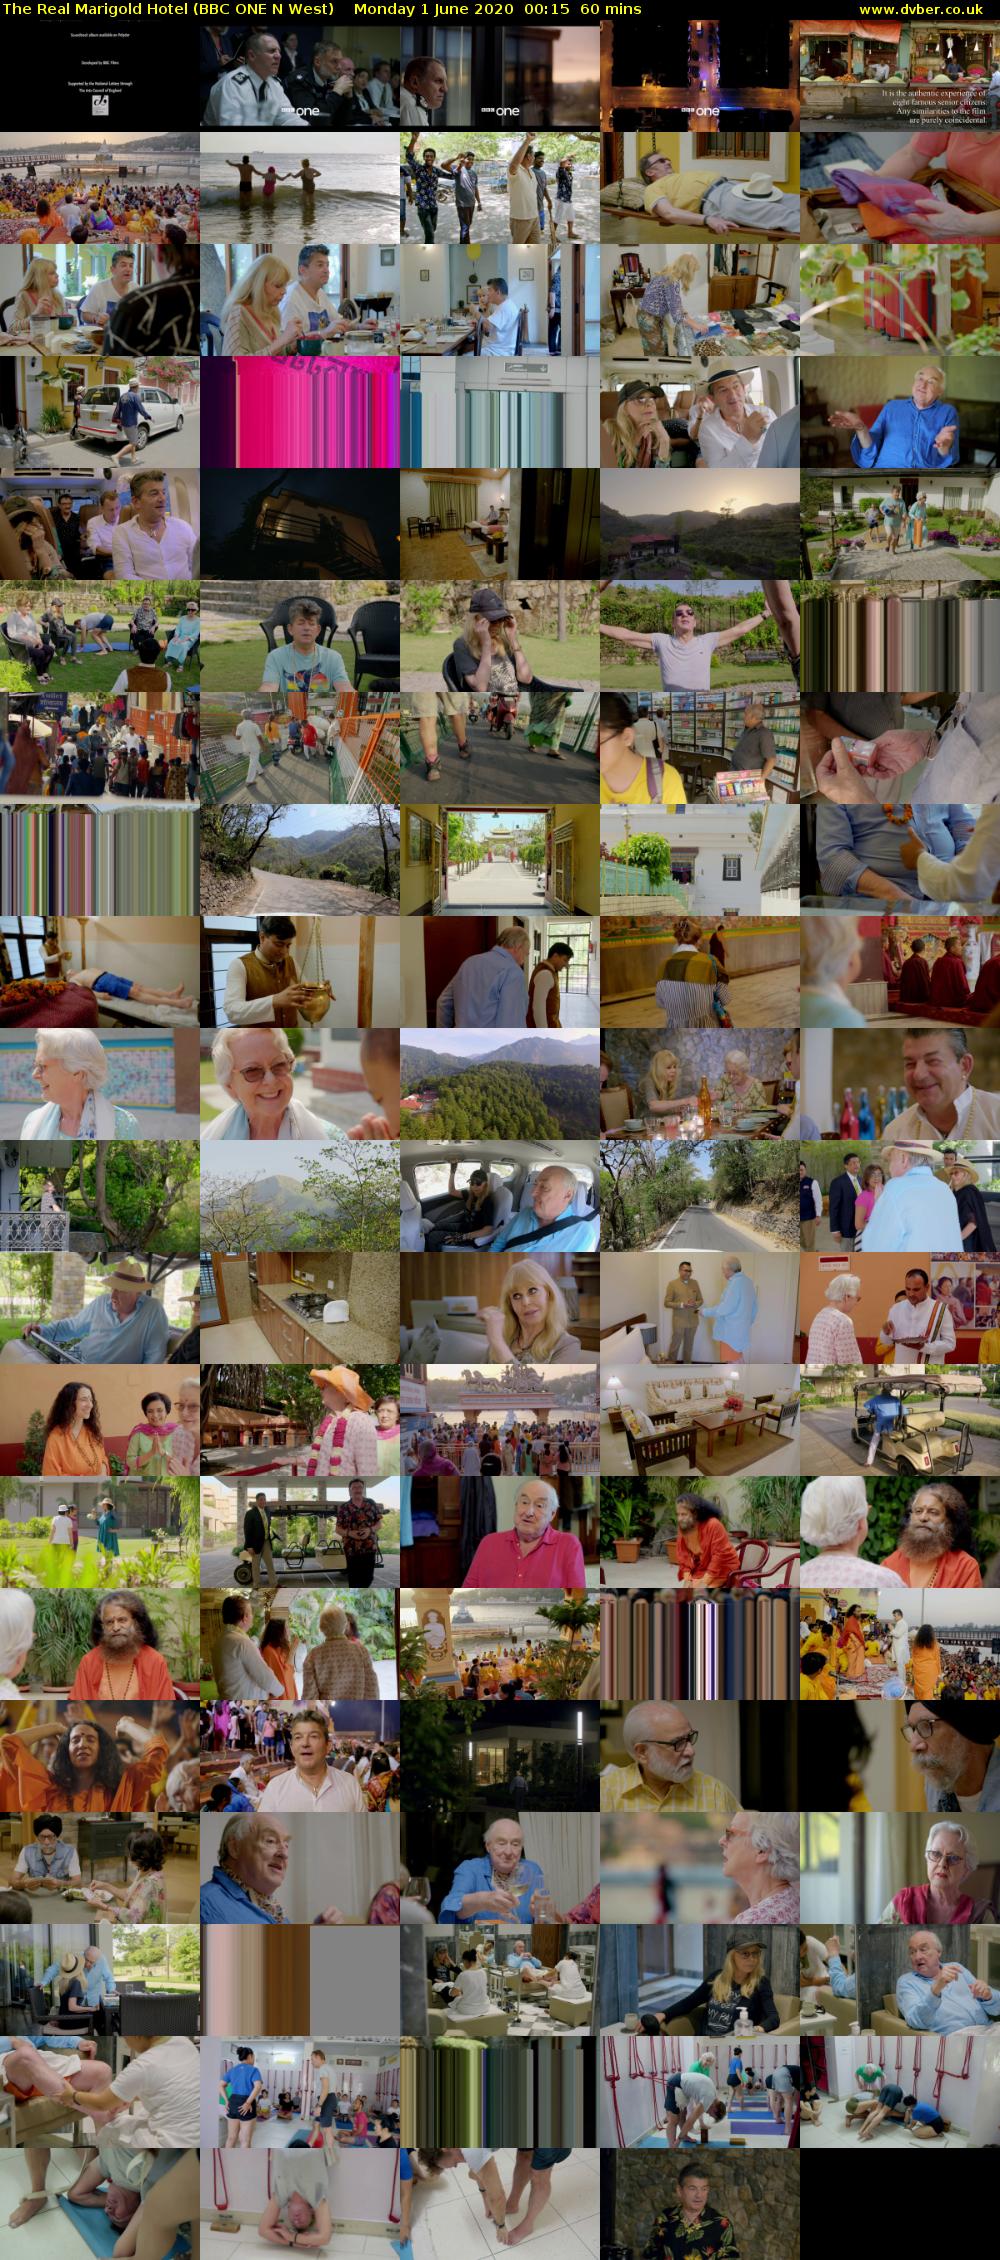 The Real Marigold Hotel (BBC ONE N West) Monday 1 June 2020 00:15 - 01:15